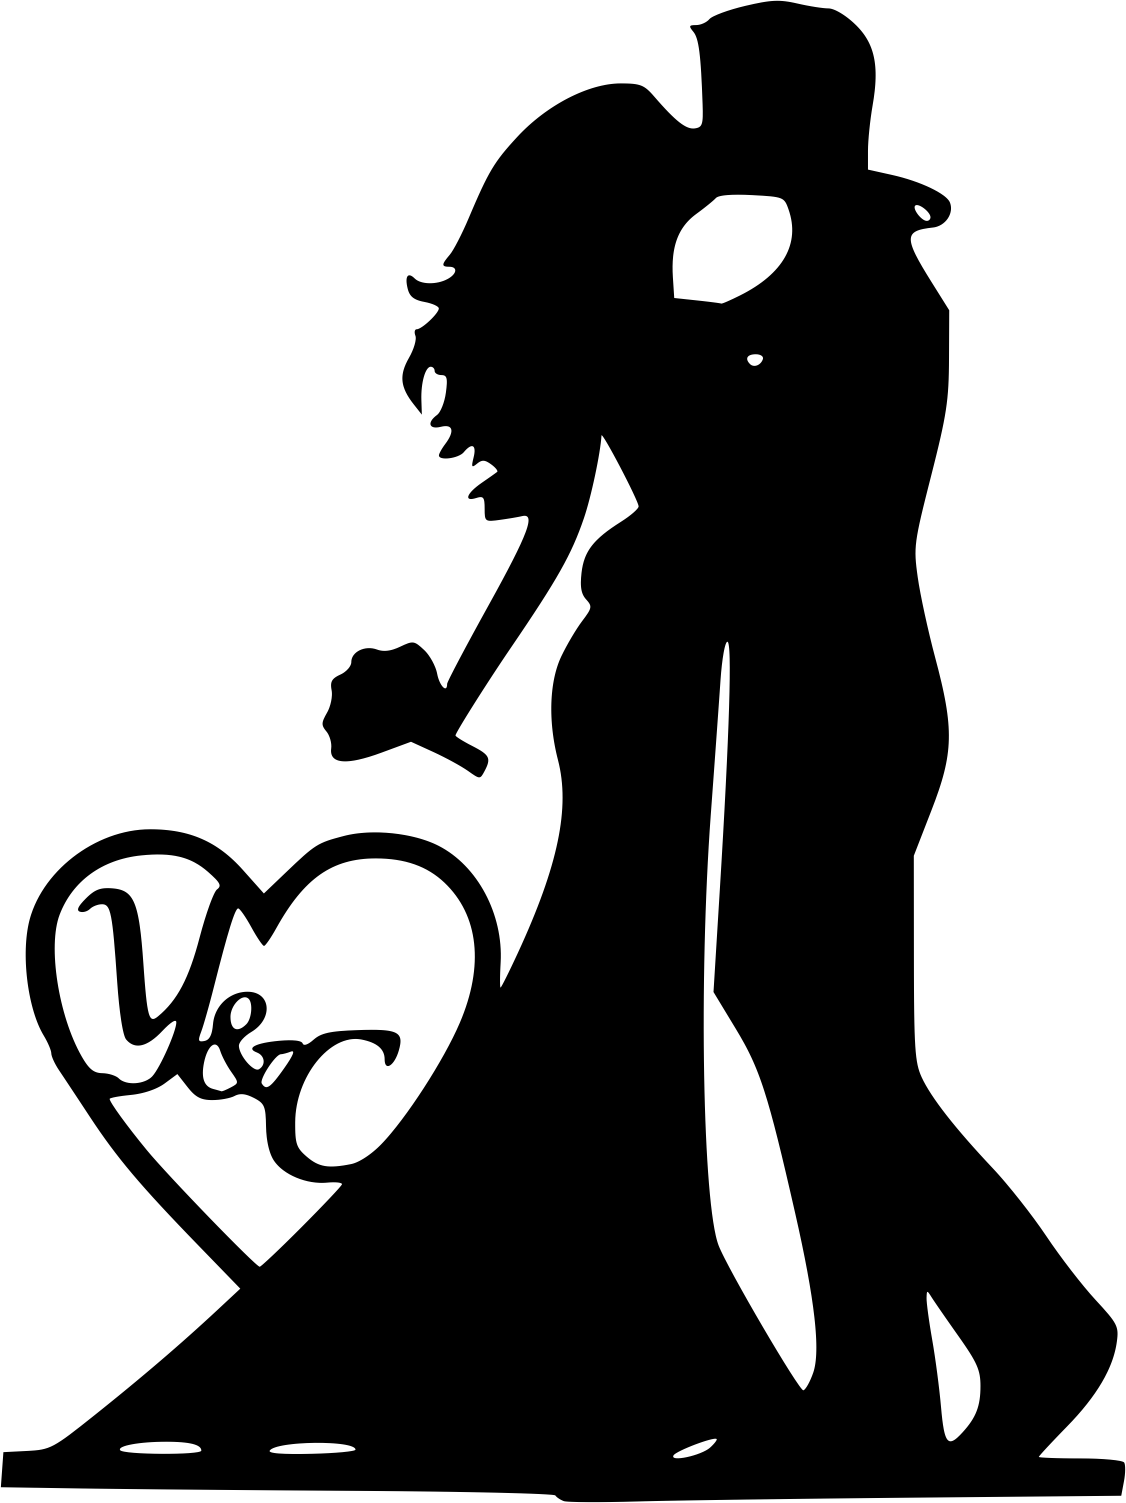 Download Mr and Mrs Silhouette Black Bride and Groom Vector Free Vector cdr Download - 3axis.co